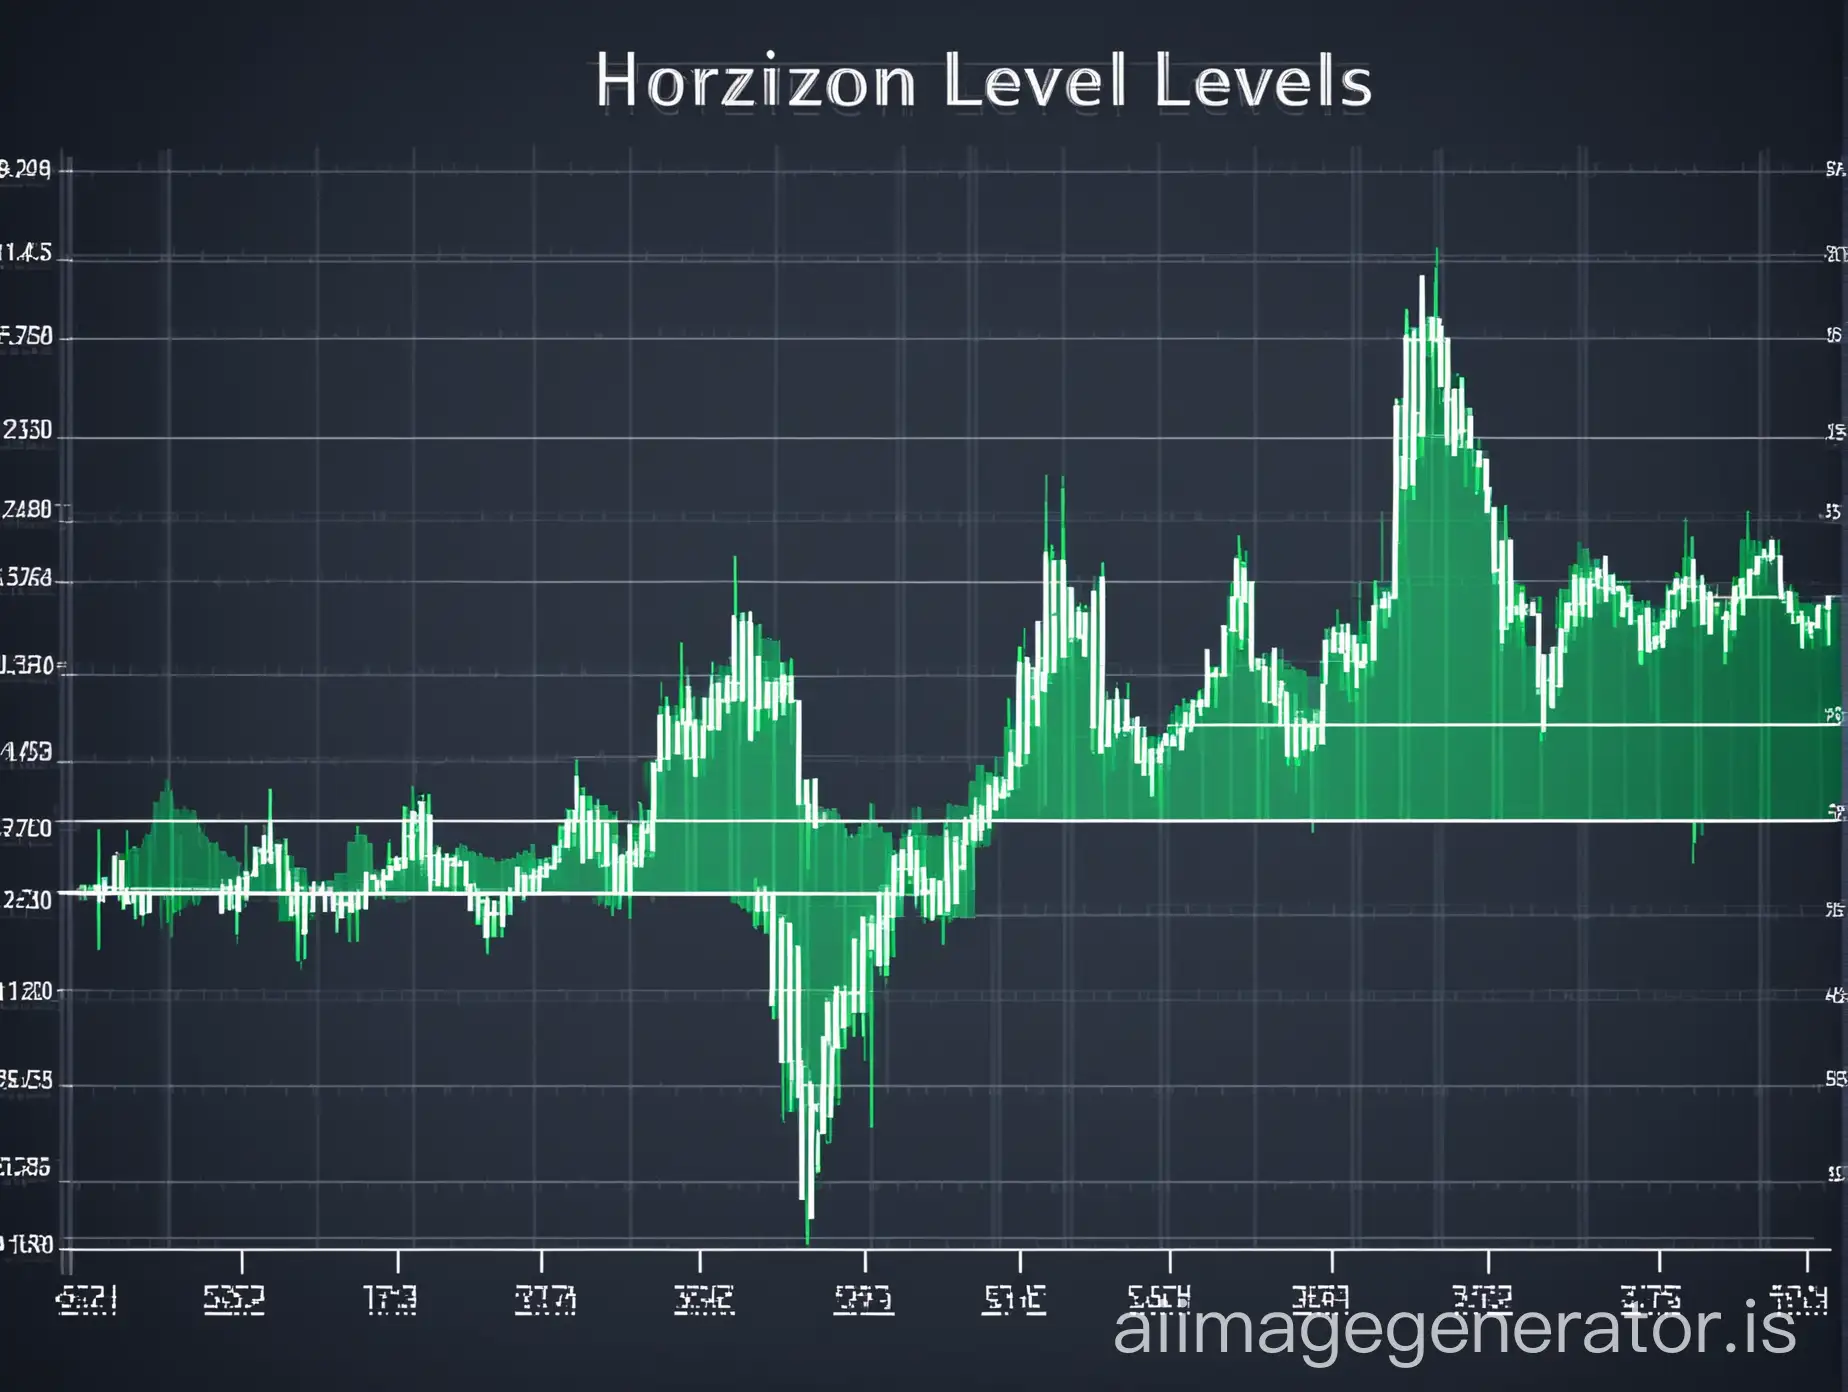 Exaggerated-Upward-Trend-of-Imaginary-Crypto-Currency-HorizontalLevels-on-Stock-Market-Graph